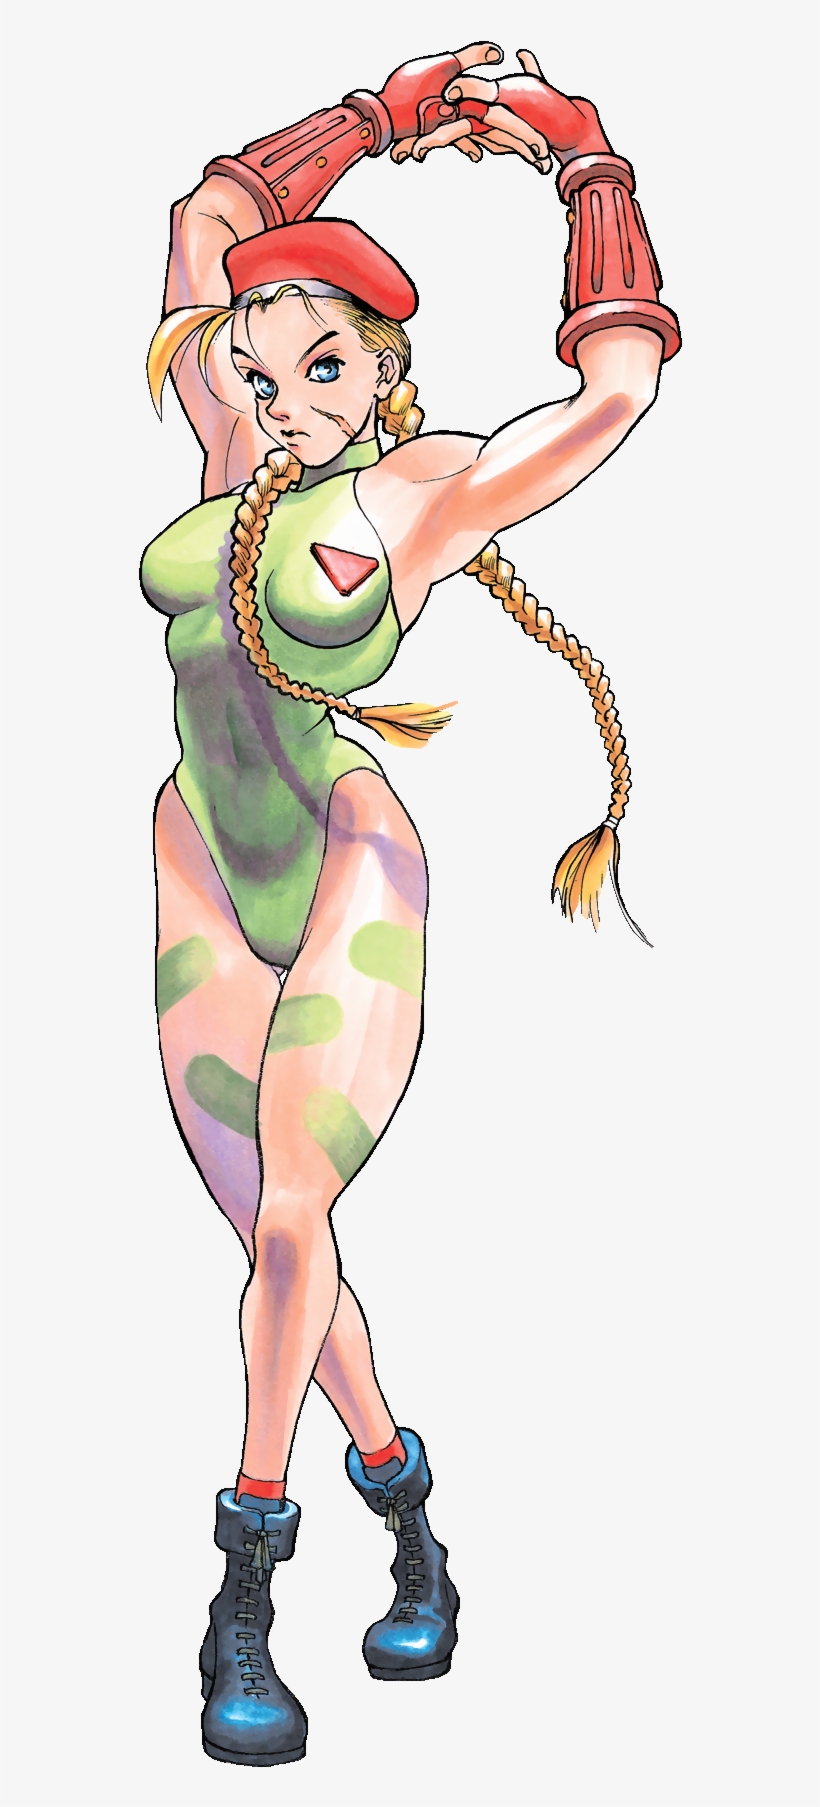 Image Street Cammy White As She Appears - Street Fighter Ii Png, transparent png #826095